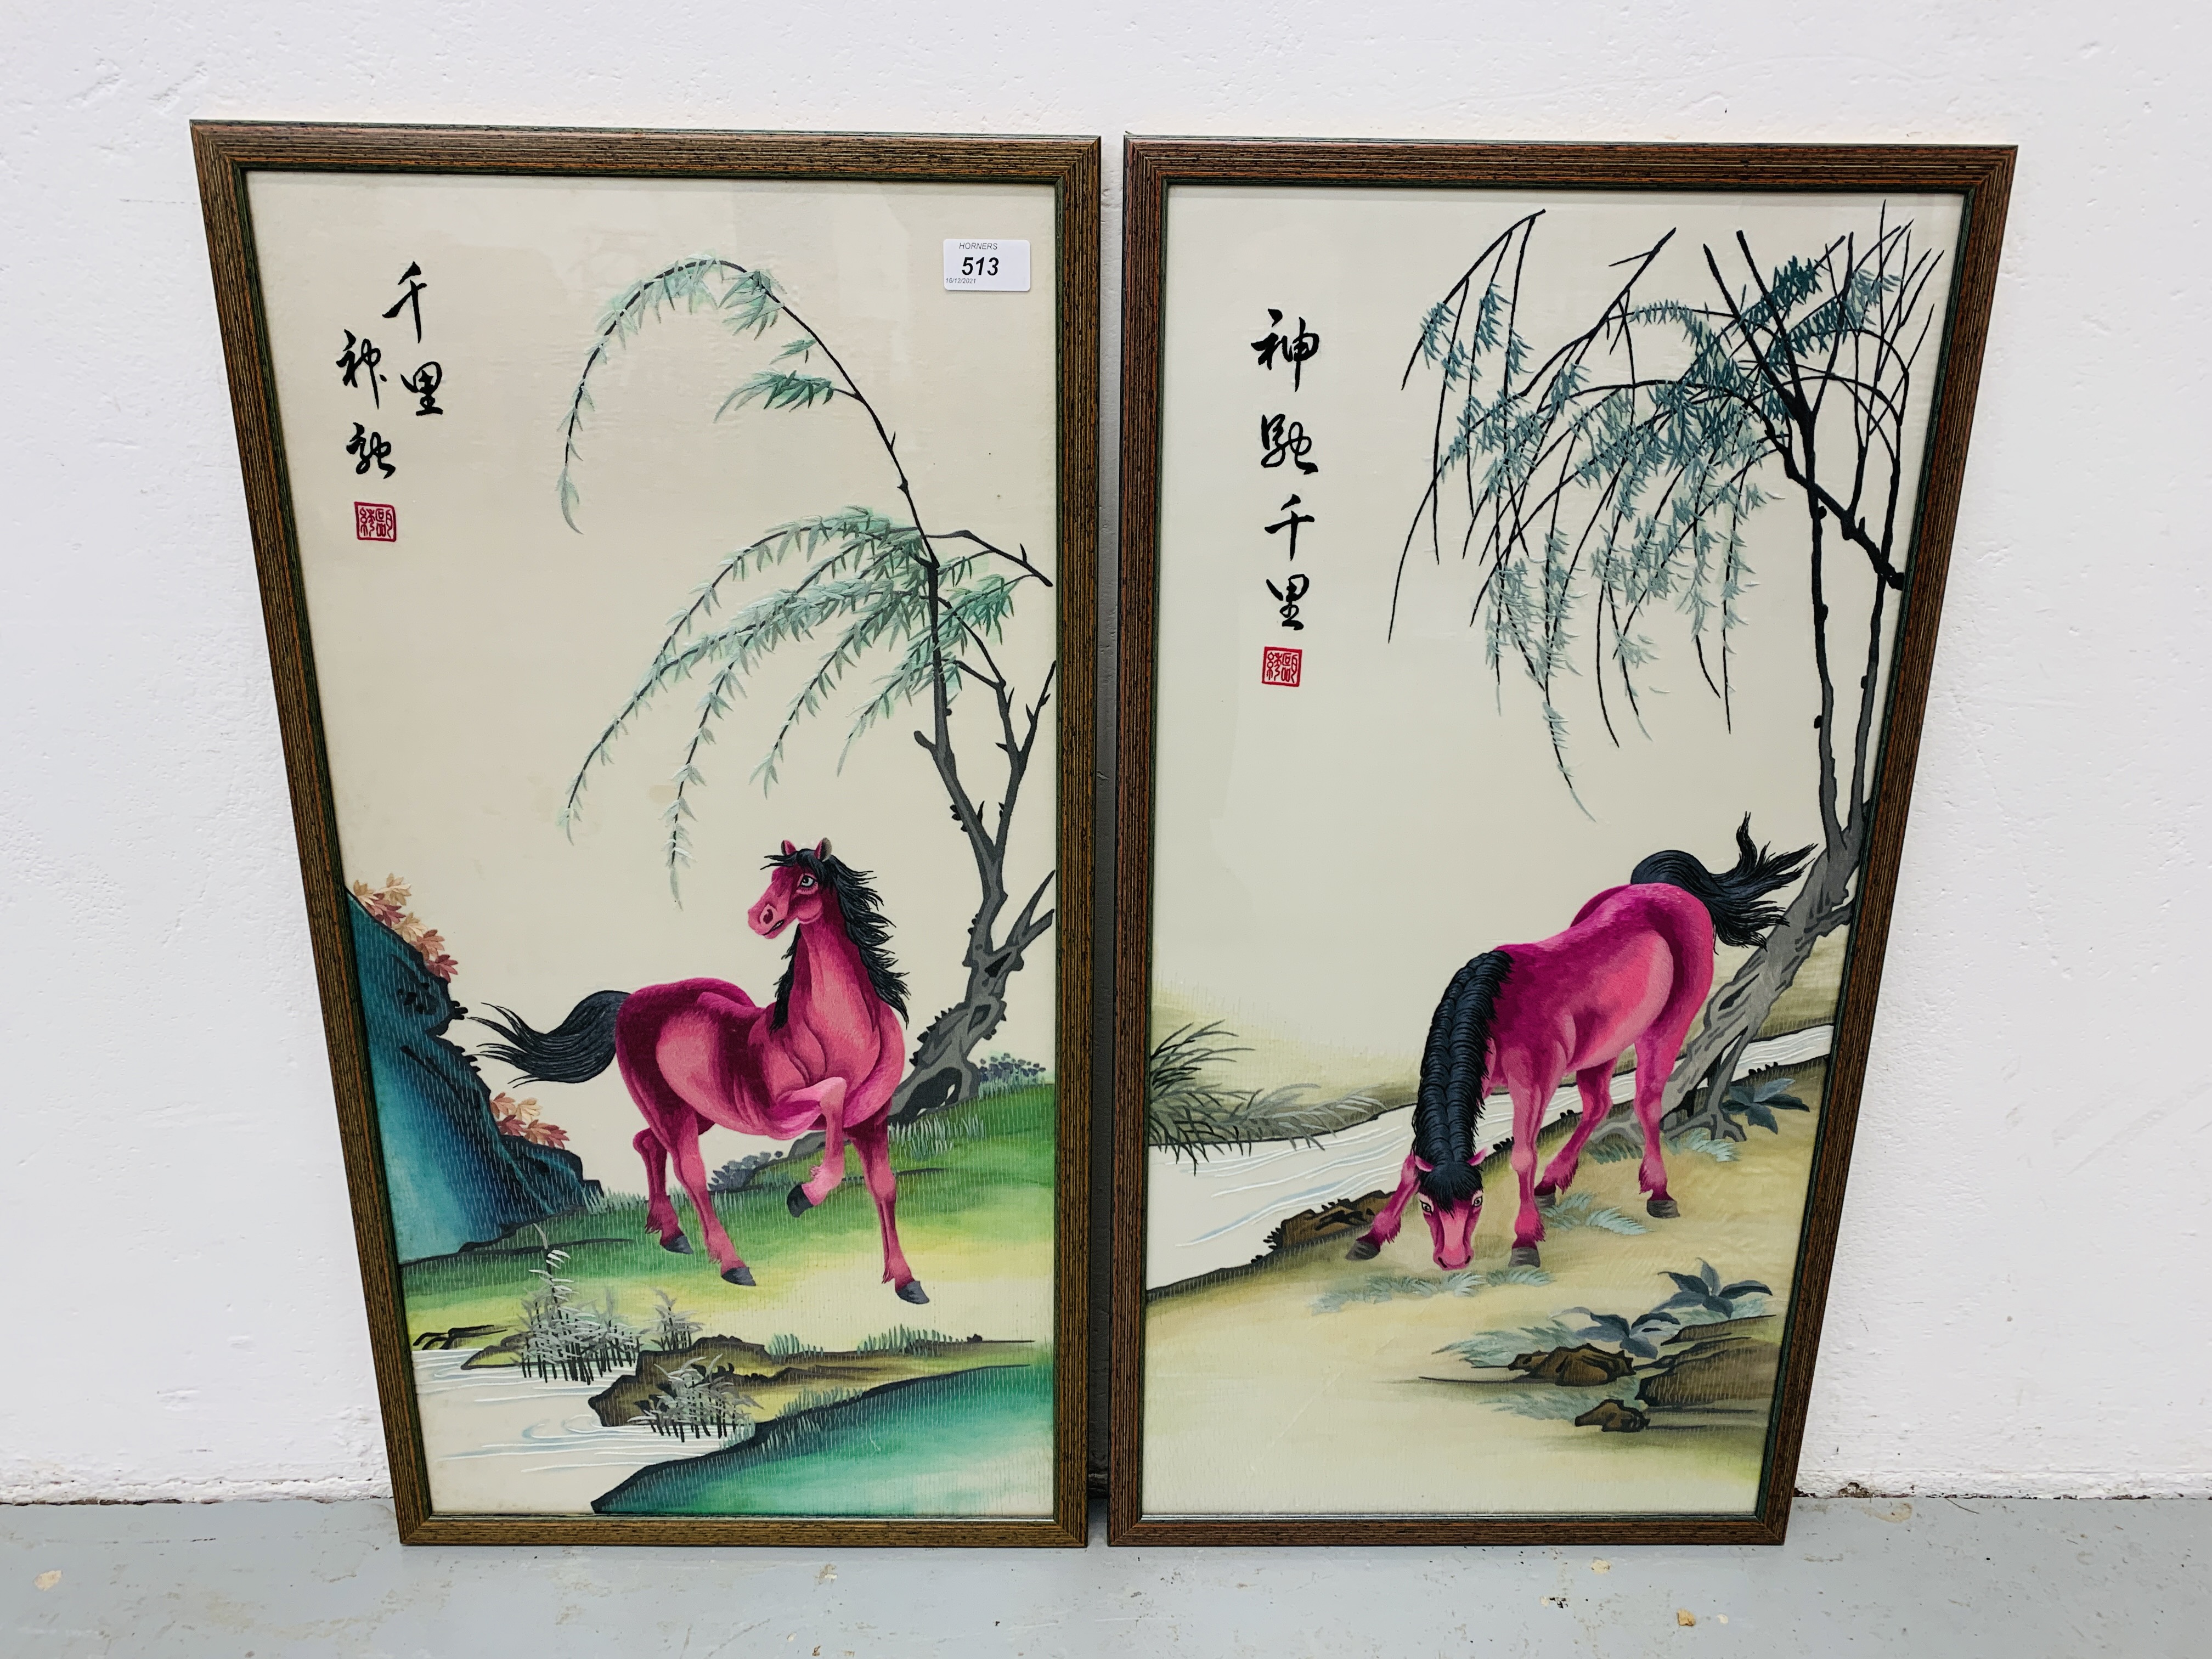 A PAIR OF FRAMED ORIENTAL EMBROIDERIES ON SILK DEPICTING PINK HORSES EACH - W 39CM. H 75CM.